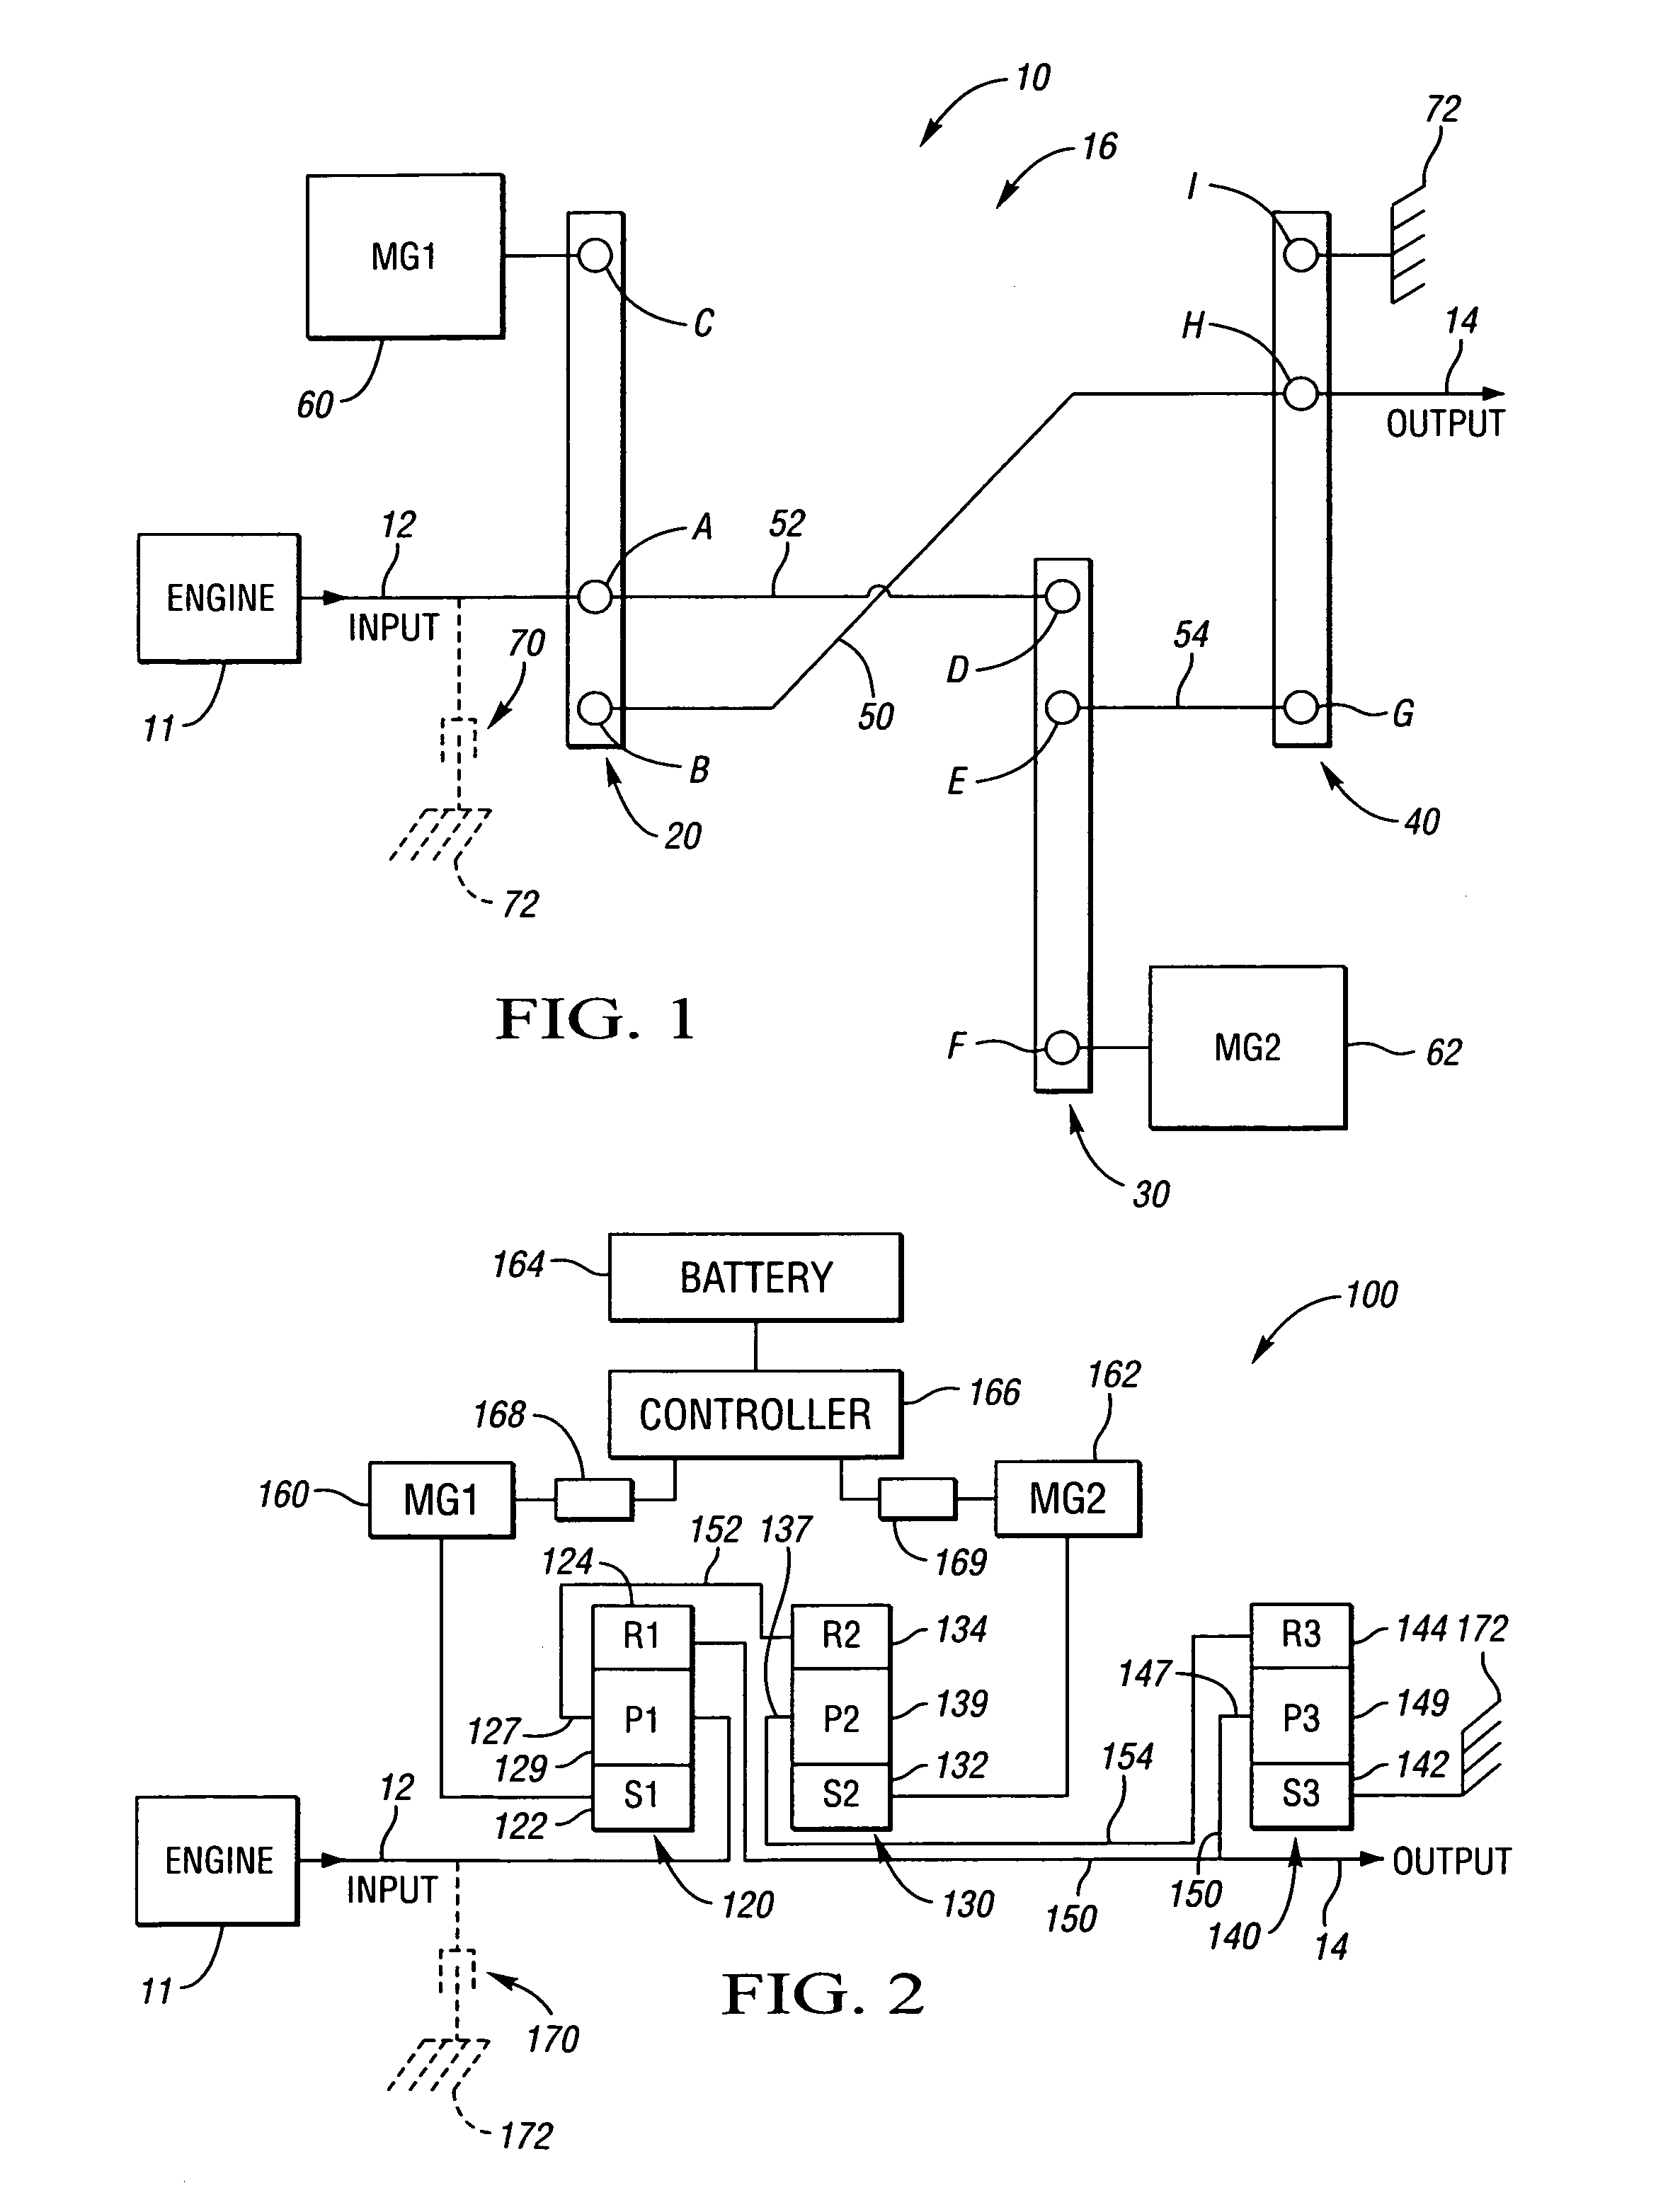 Single mode, compound-split transmission with dual mechanical paths and fixed reduction ratio